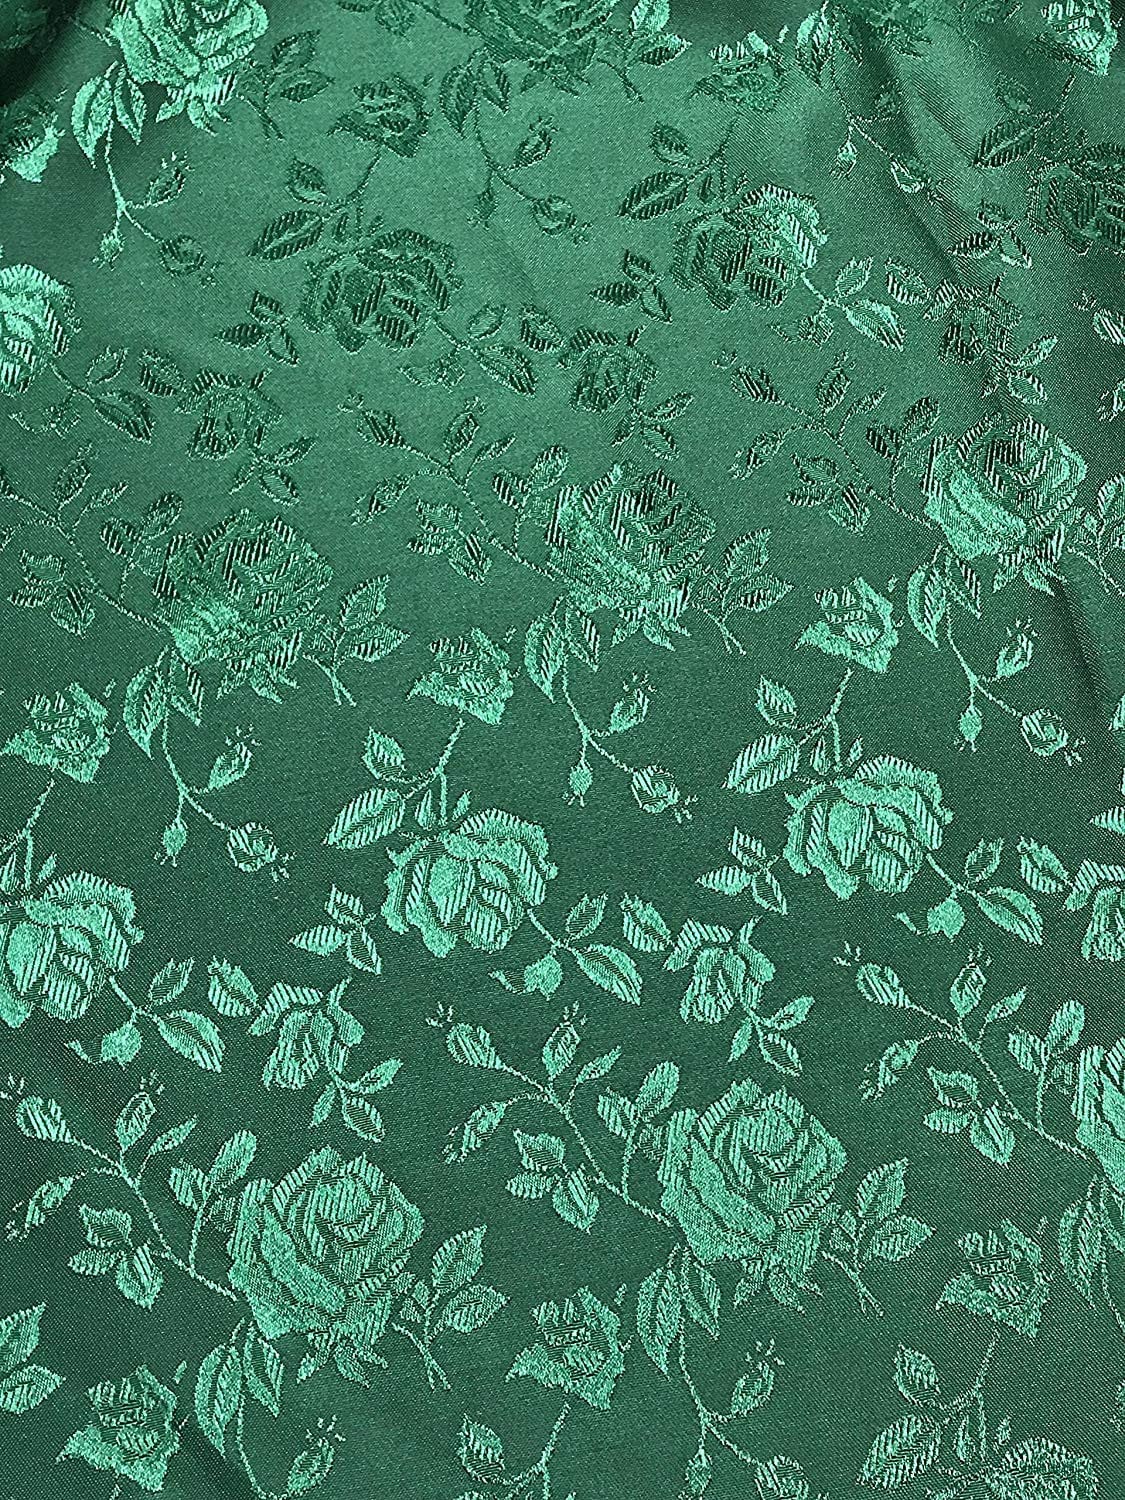 Fabric Mart Direct Chartreuse Jacquard Velvet Fabric By The Yard, 54 inches  or 137 cm width, 1 Yard Green Jacquard Fabric, Flowers Floral, Upholstery